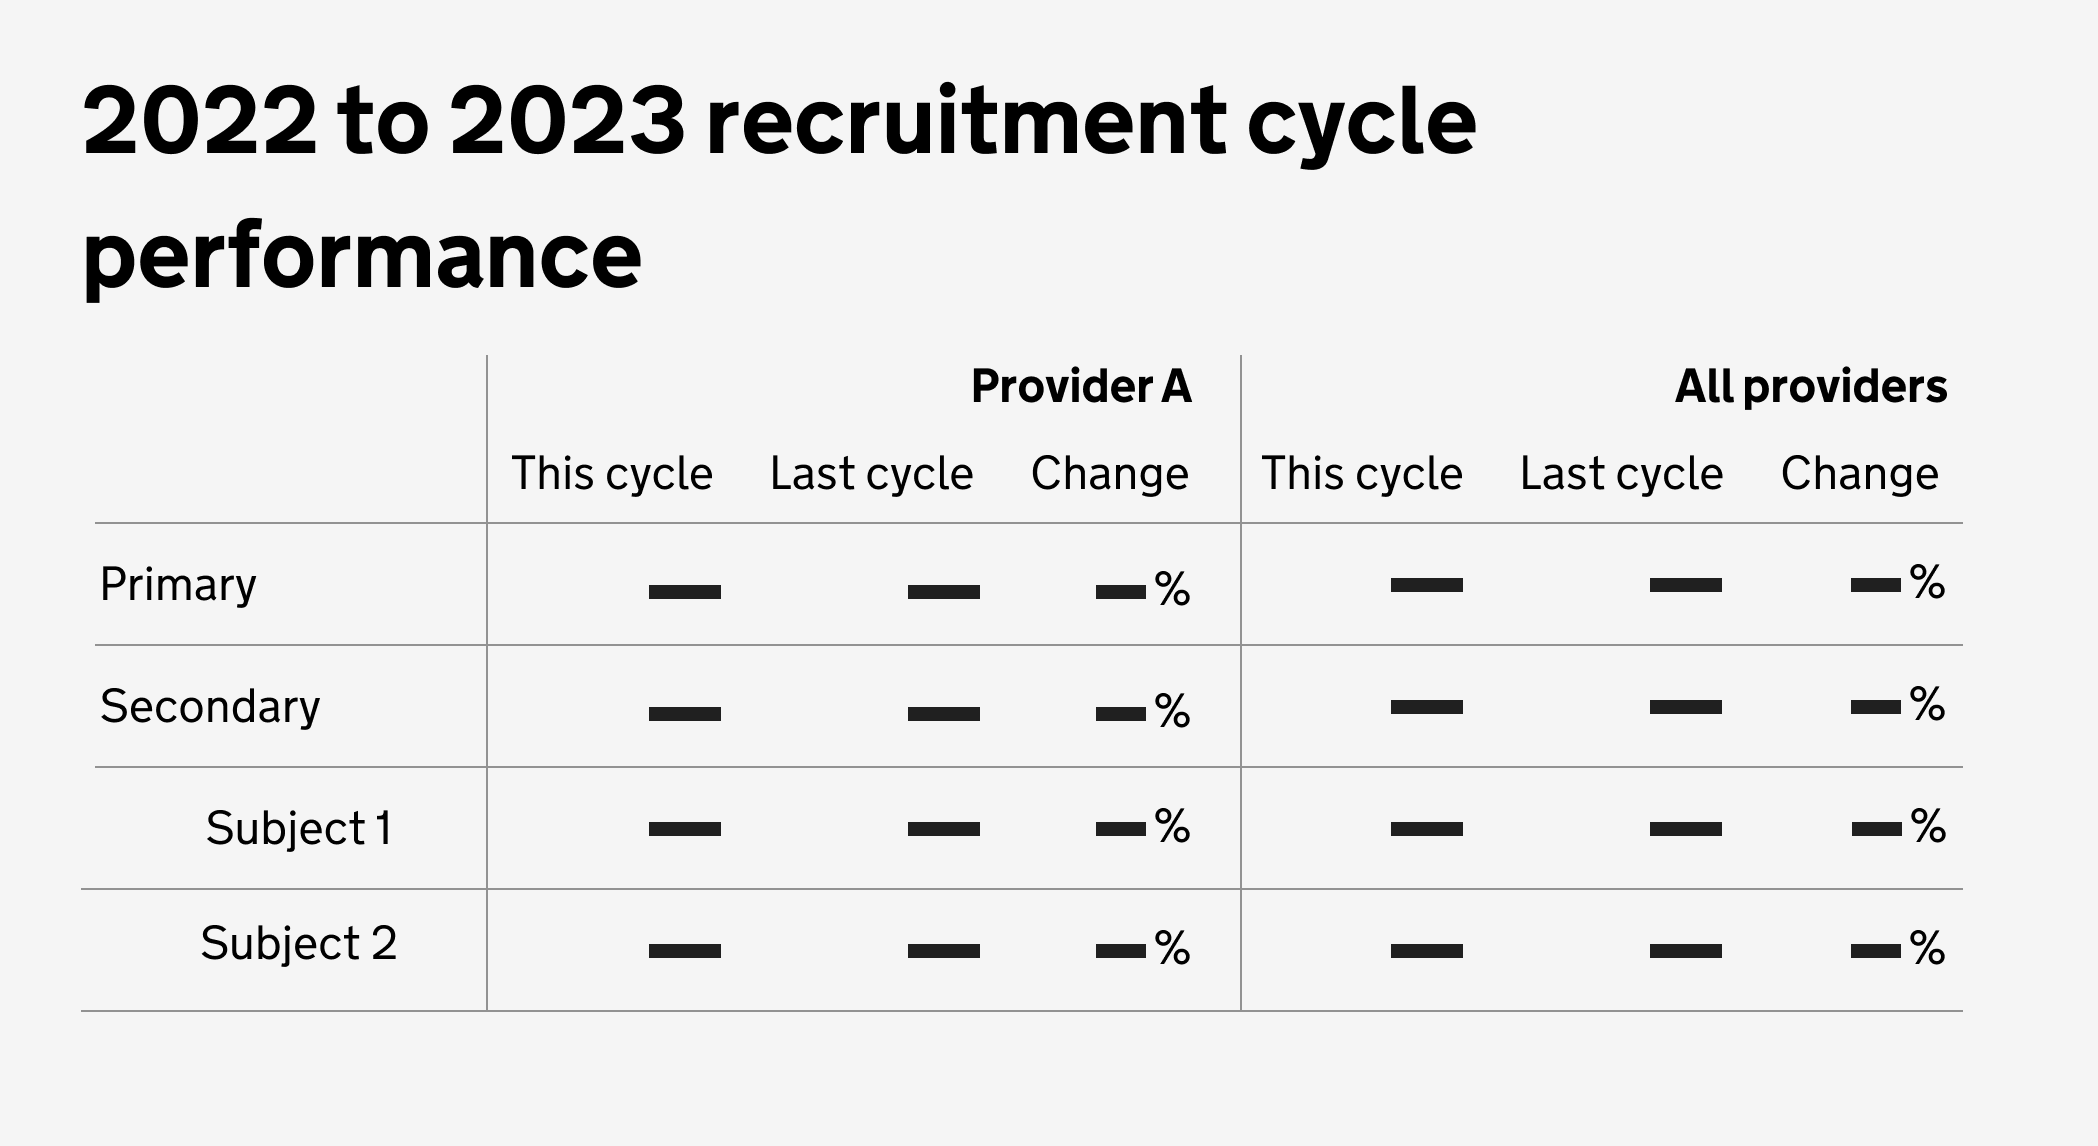 Illustration with the heading '2022 to 2023 recruitment cycle performance' followed by a table with 3 columns: Provider A, split by this cycle, last cycle and pecentage change. Then all providers, split by this cycle, last cycle and percentage change.